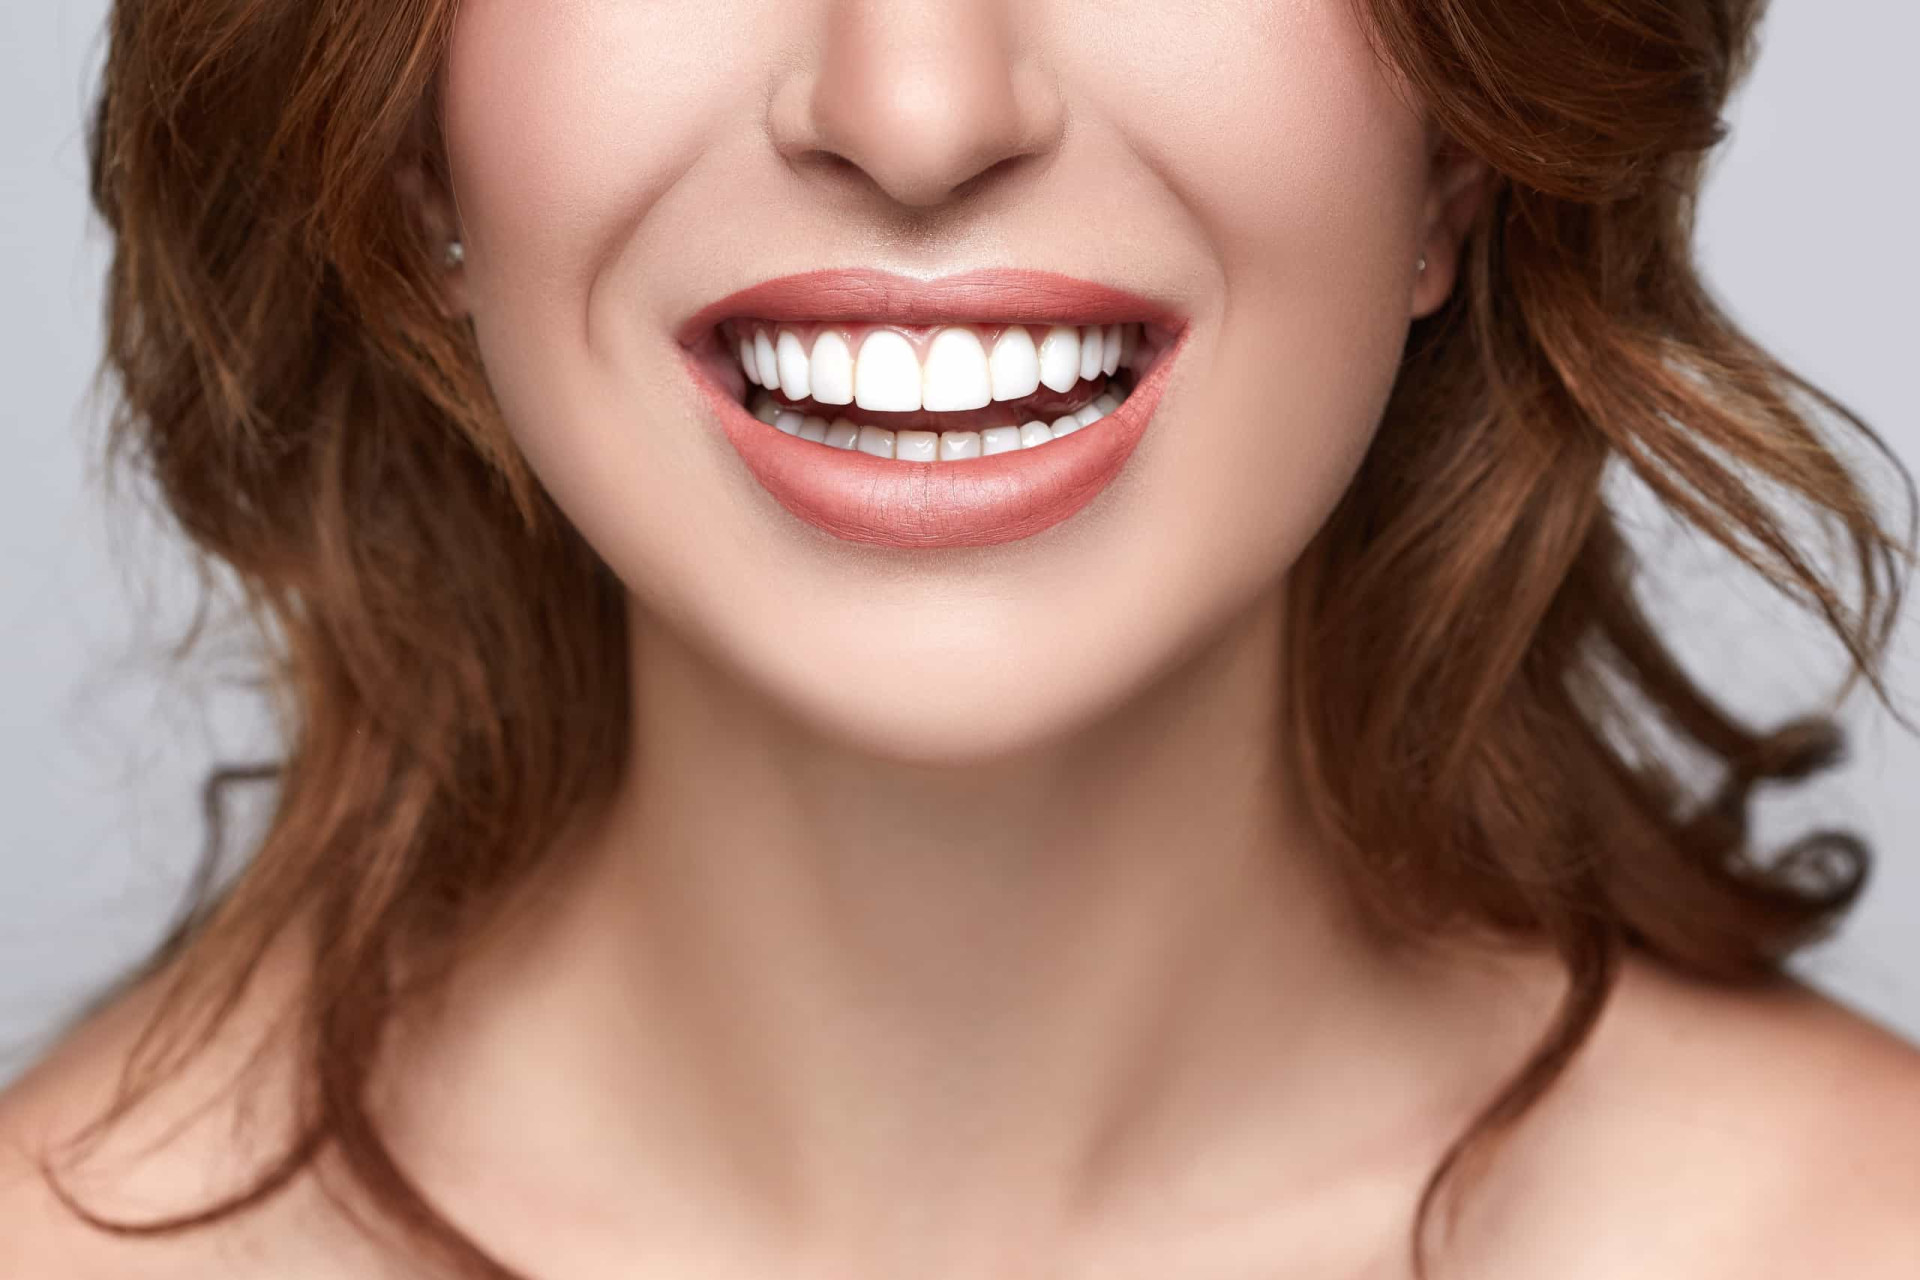 If you are feeling anxious about growing older or being ugly, teeth often come up. It is because they are so prominent in the face and invisible to our own eyes that they become a metaphor for wider appearance insecurities.<p><a href="https://www.msn.com/en-us/community/channel/vid-7xx8mnucu55yw63we9va2gwr7uihbxwc68fxqp25x6tg4ftibpra?cvid=94631541bc0f4f89bfd59158d696ad7e">Follow us and access great exclusive content every day</a></p>